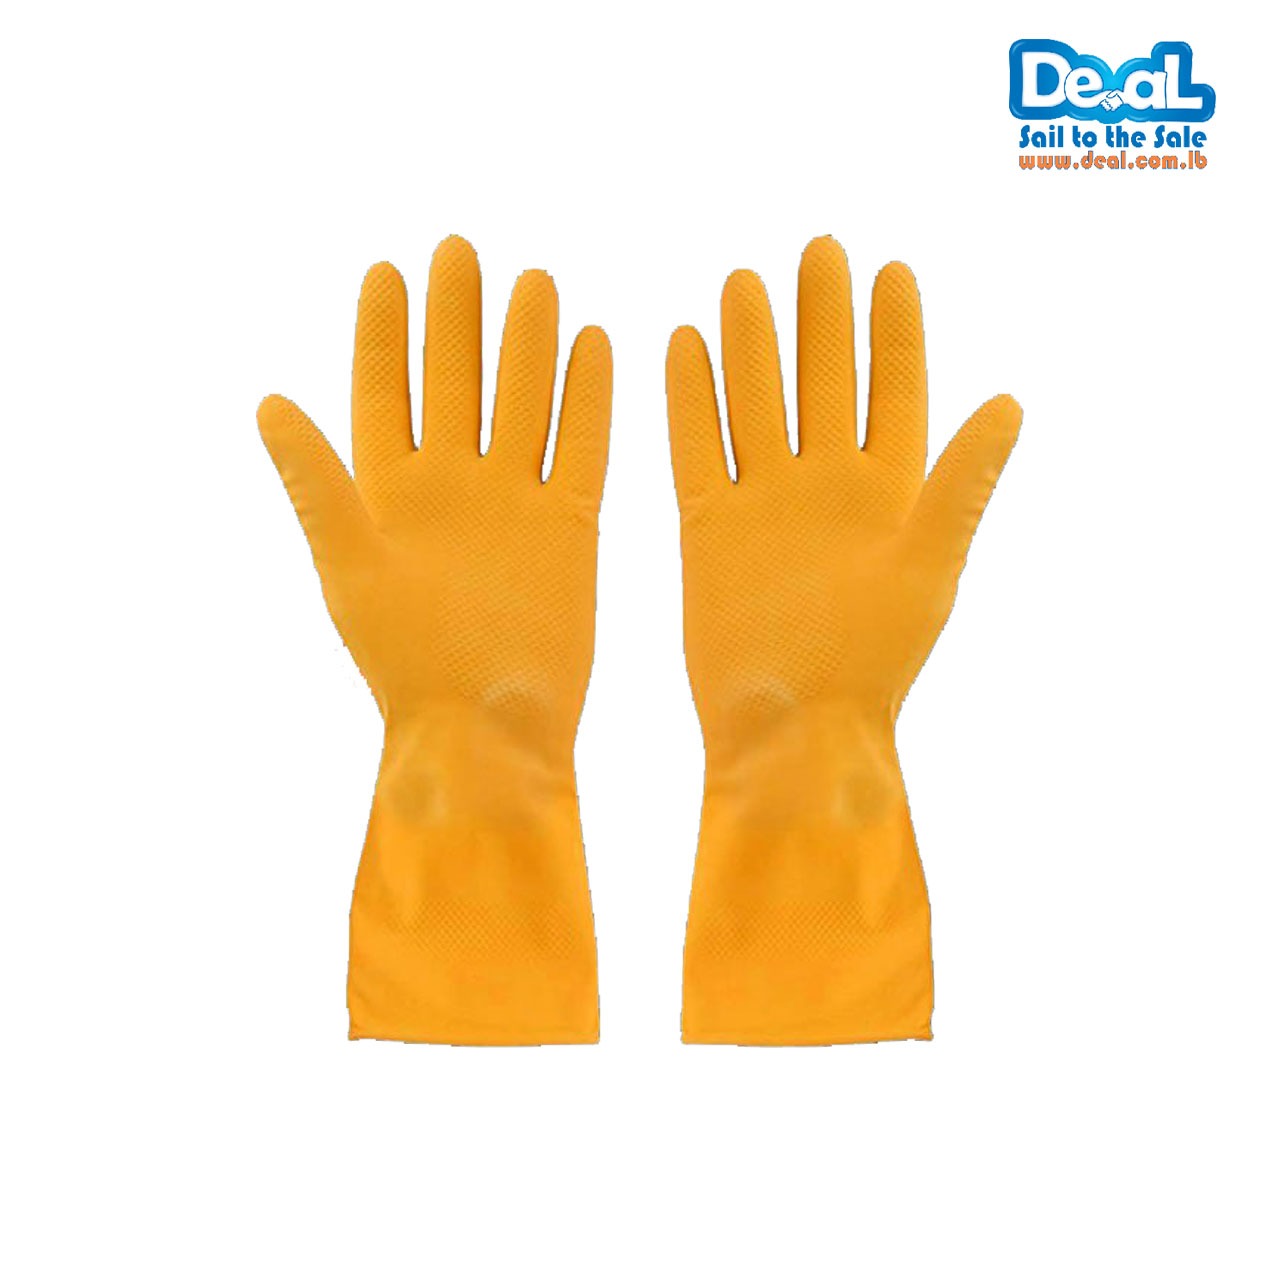 General+Duty+Latex+Protective+Gloves+%7CSize%7C+Small+-+Large